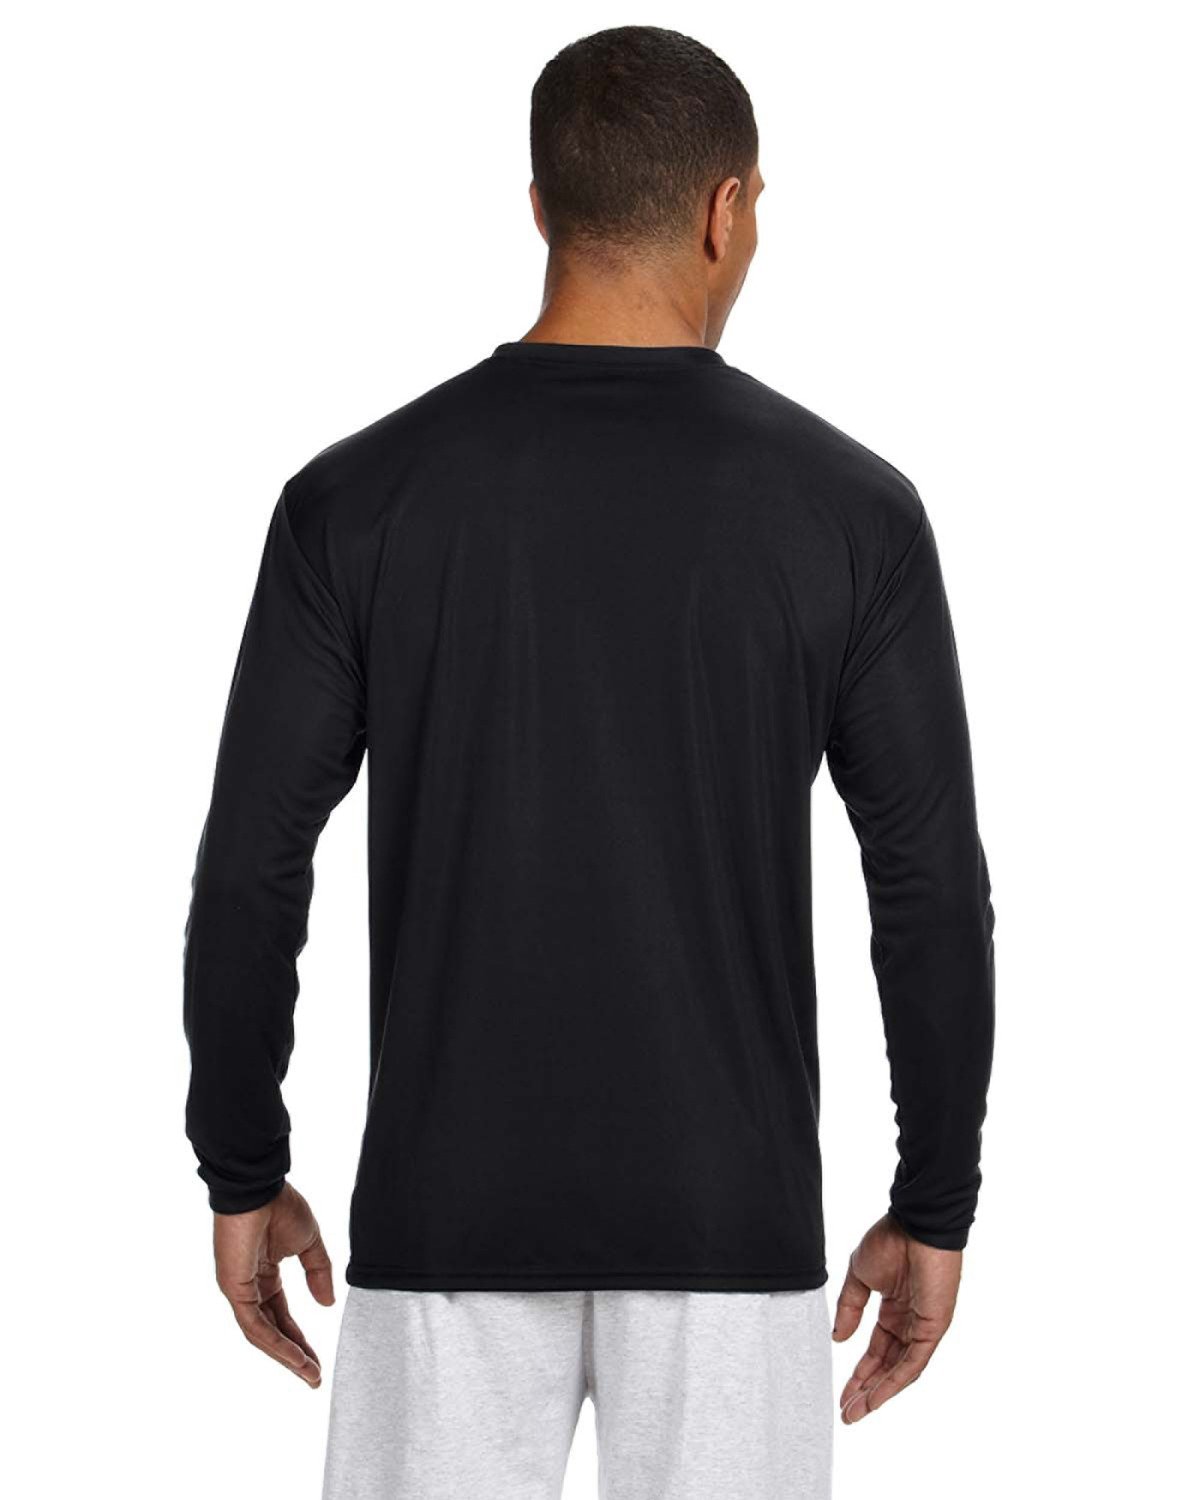  A4 Cooling Performance Long Sleeve Crew - Black - XS